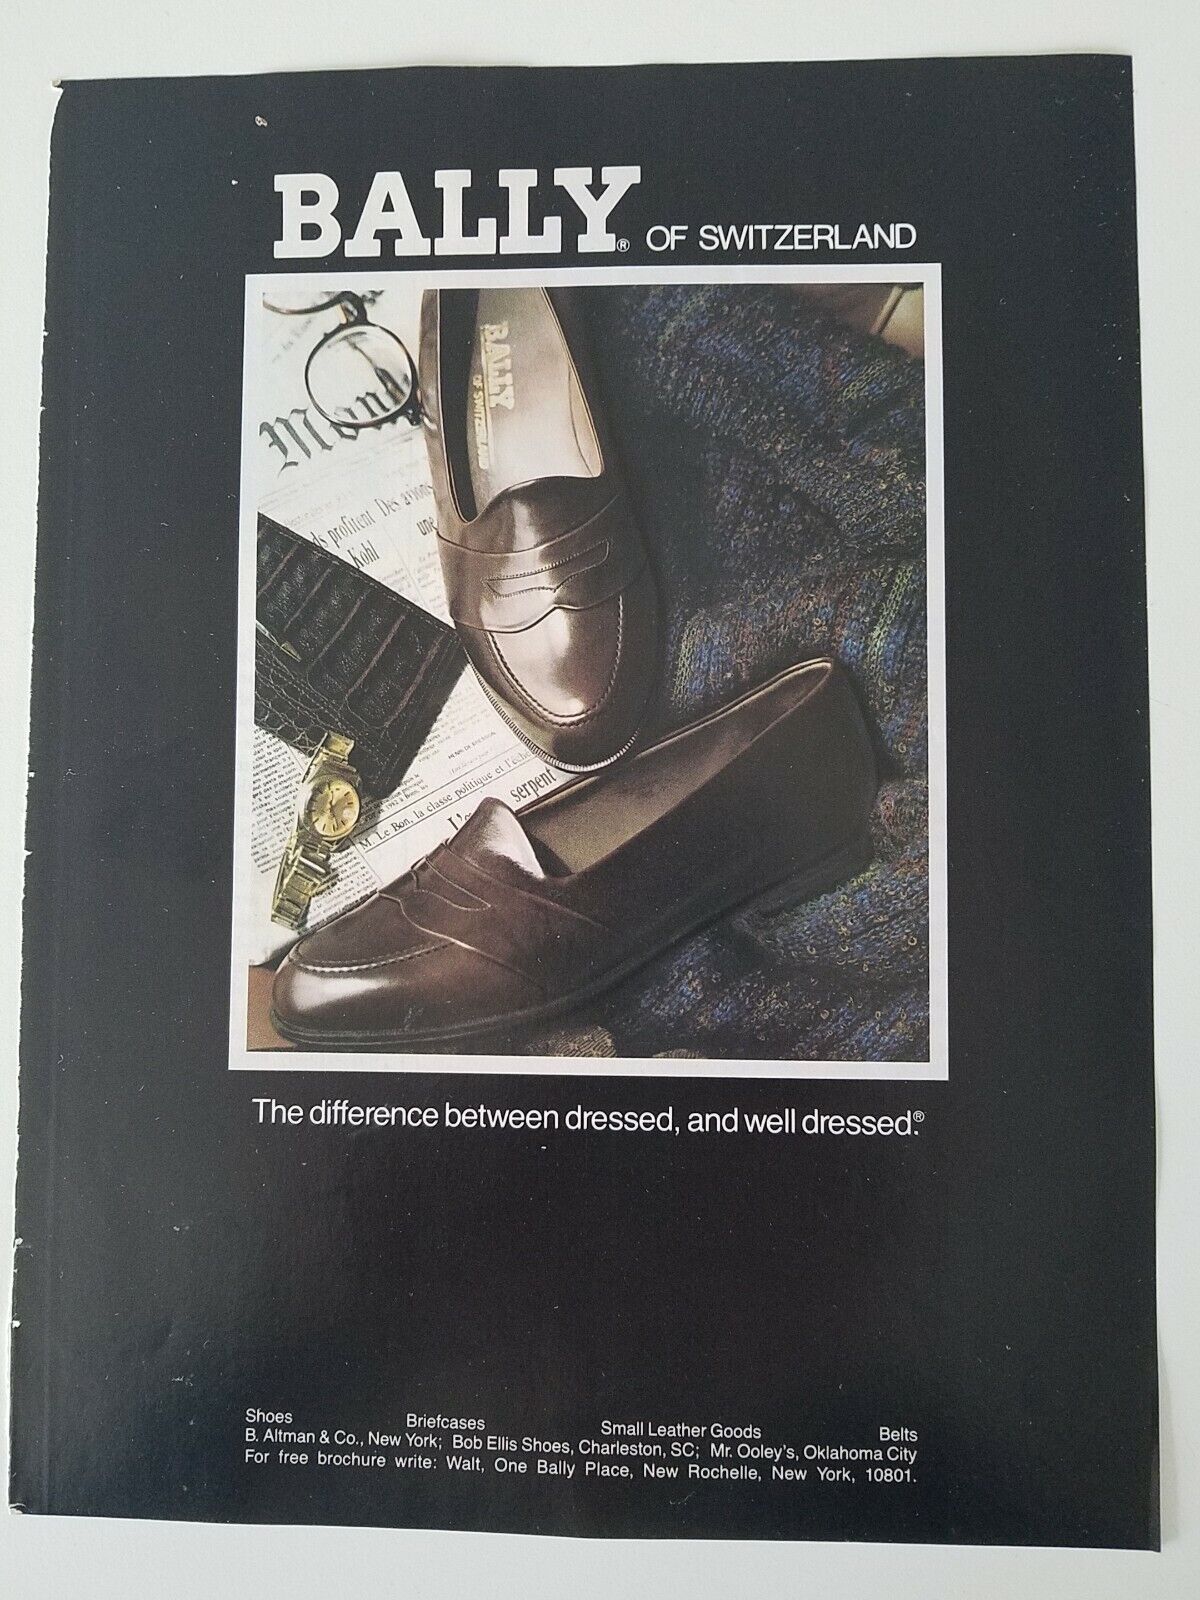 1987 Bally of Switzerland penny loafer shoes vintage fashion ad